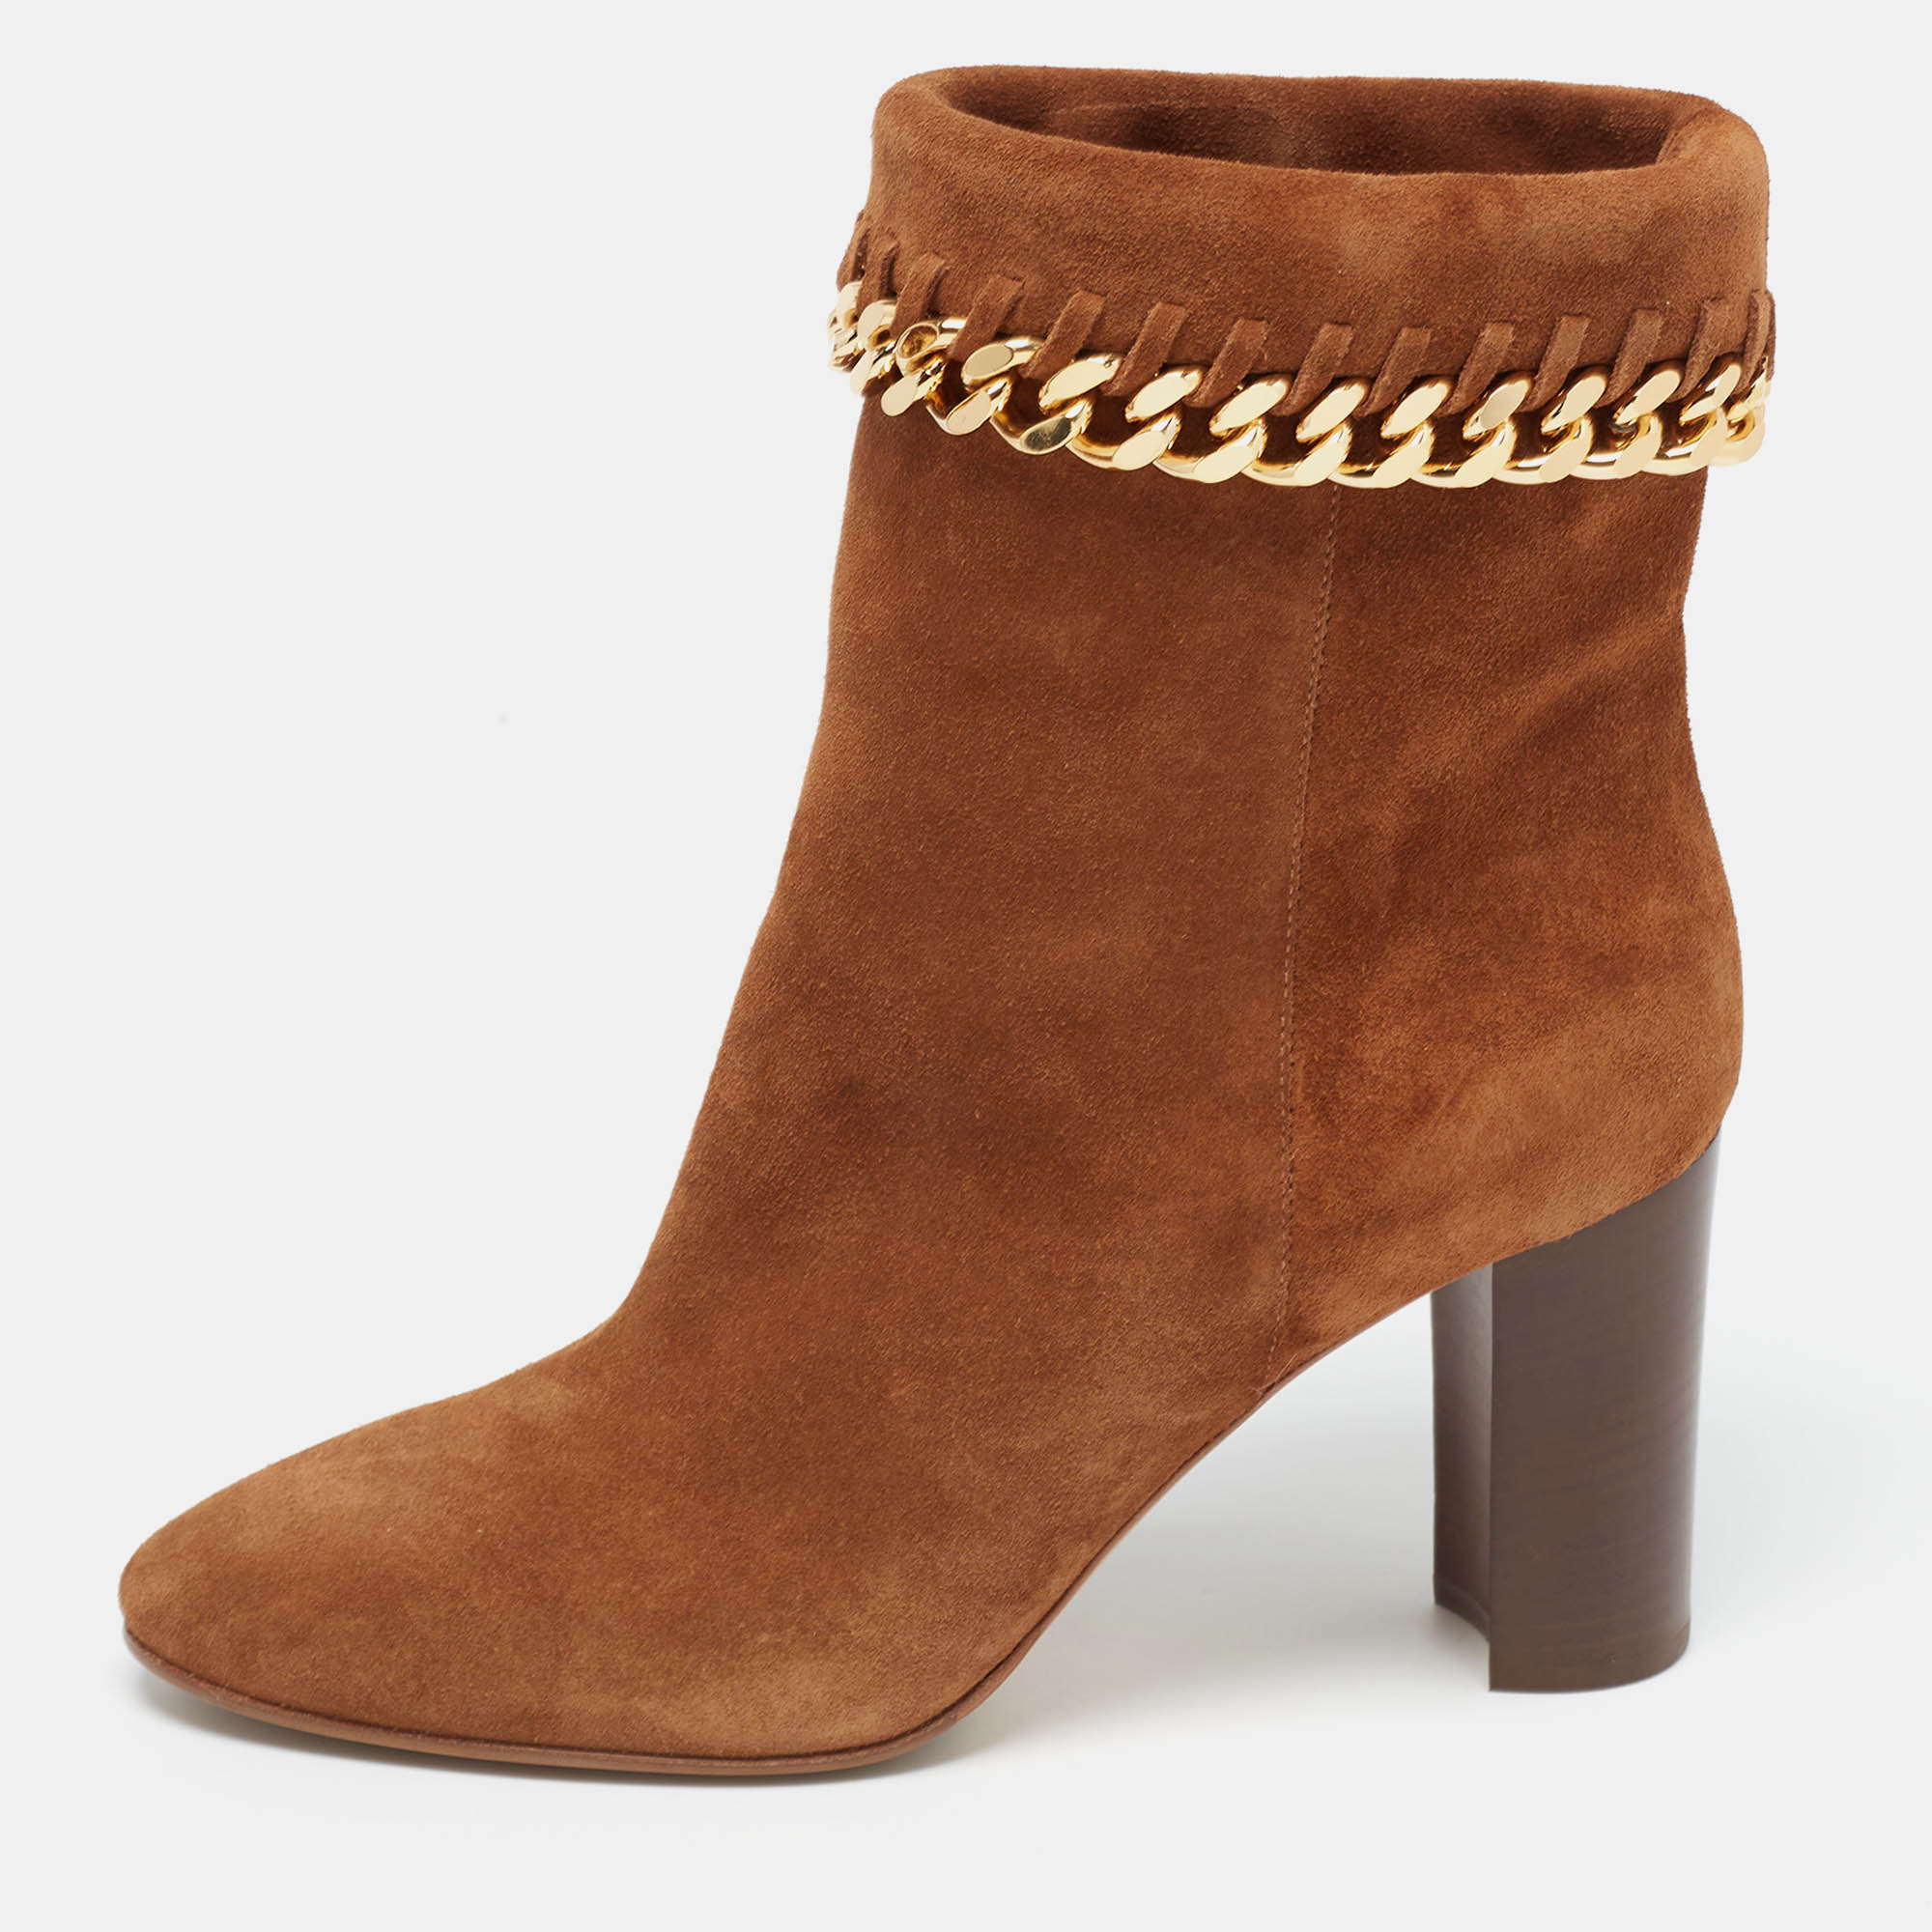 Casadei brown suede chain detail ankle boots size 37